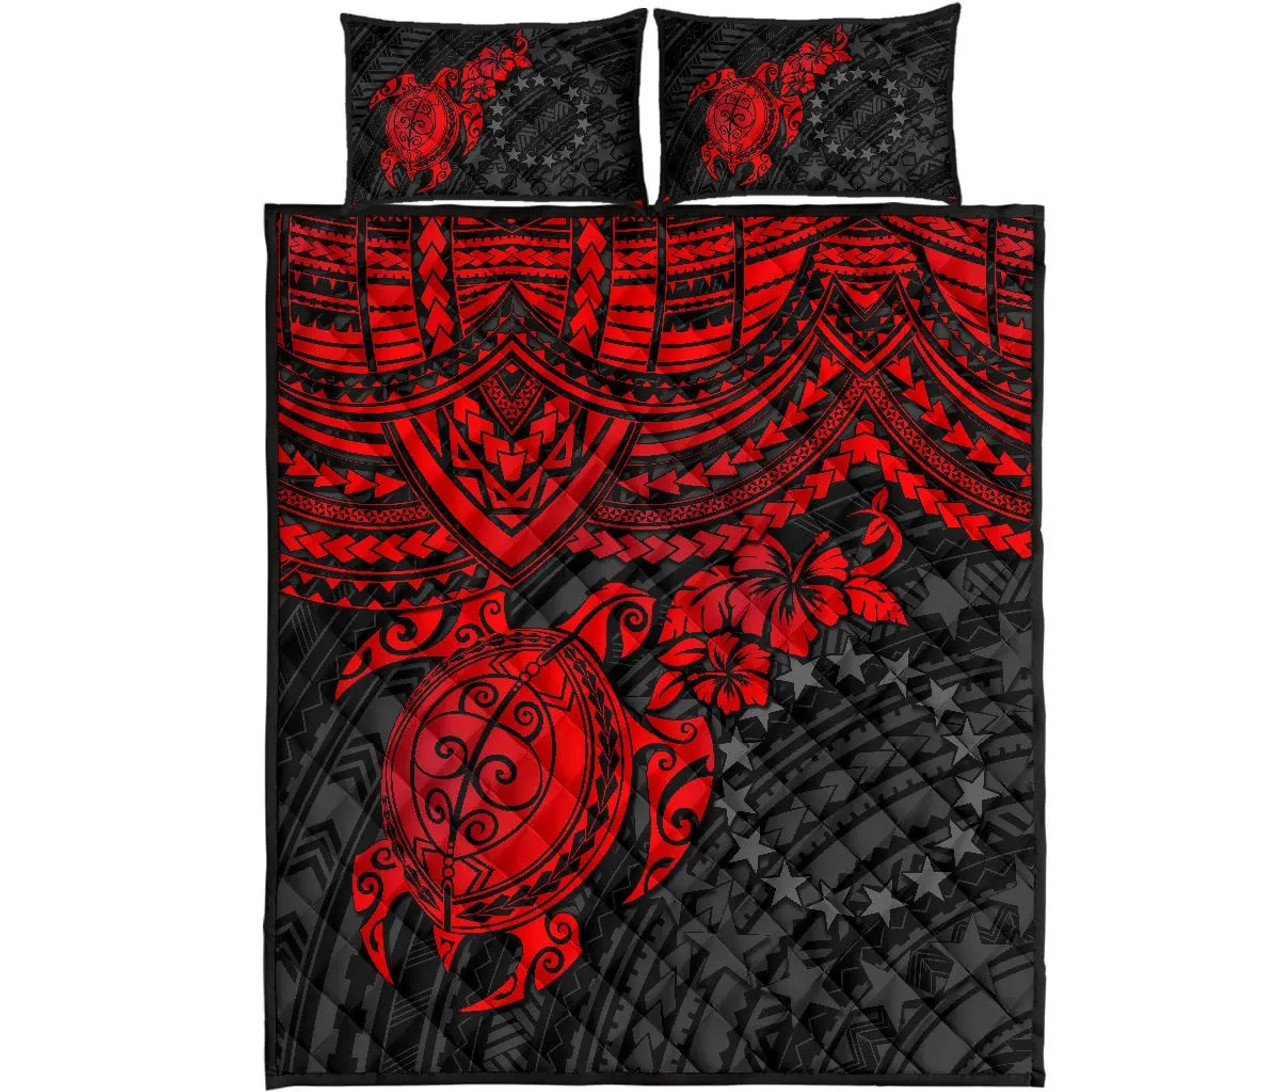 Cook Islands Polynesian Quilt Bed Set - Cook Islands Flag & Red Turtle Hibiscus 4